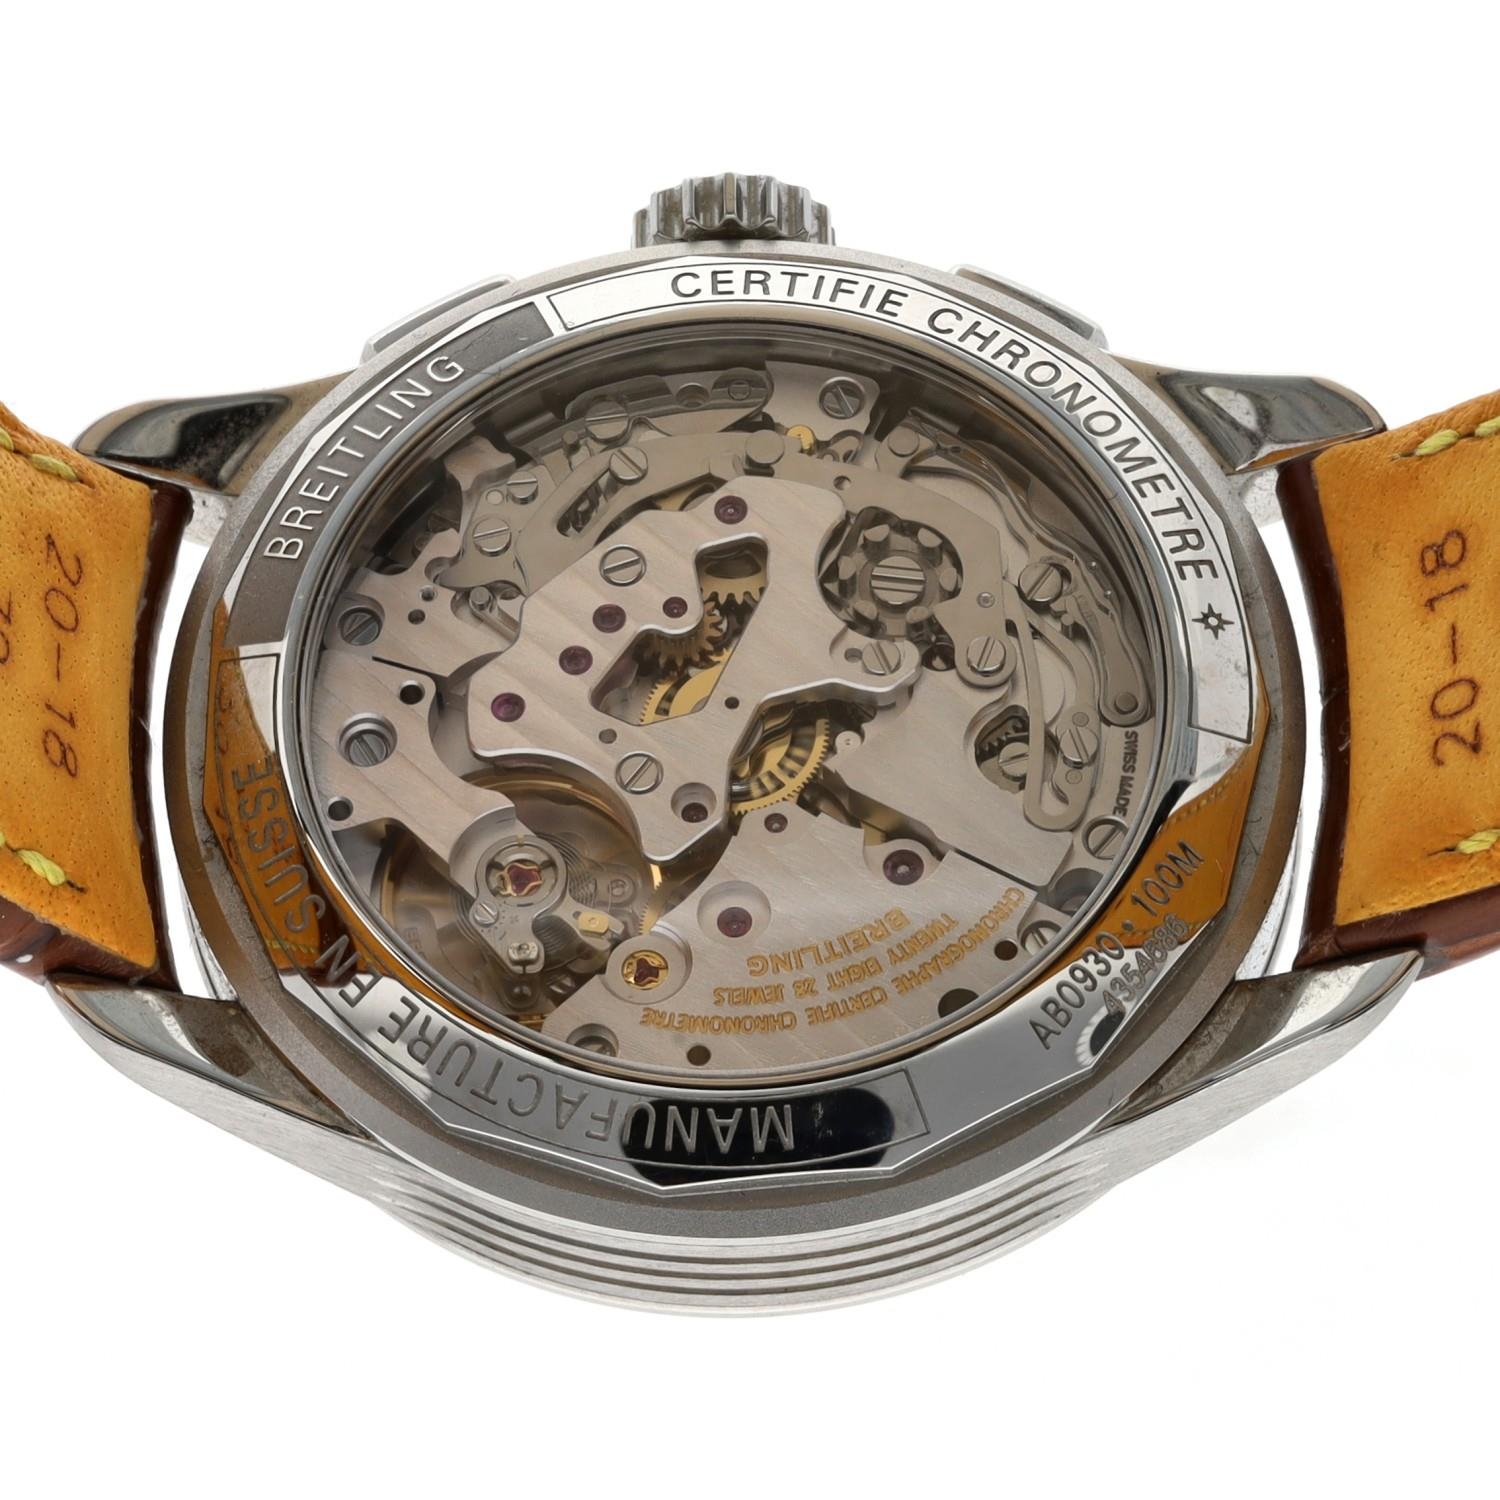 Breitling Premier B09 Chronograph 40 stainless steel gentleman's wristwatch, reference no. AB0930, - Image 7 of 7